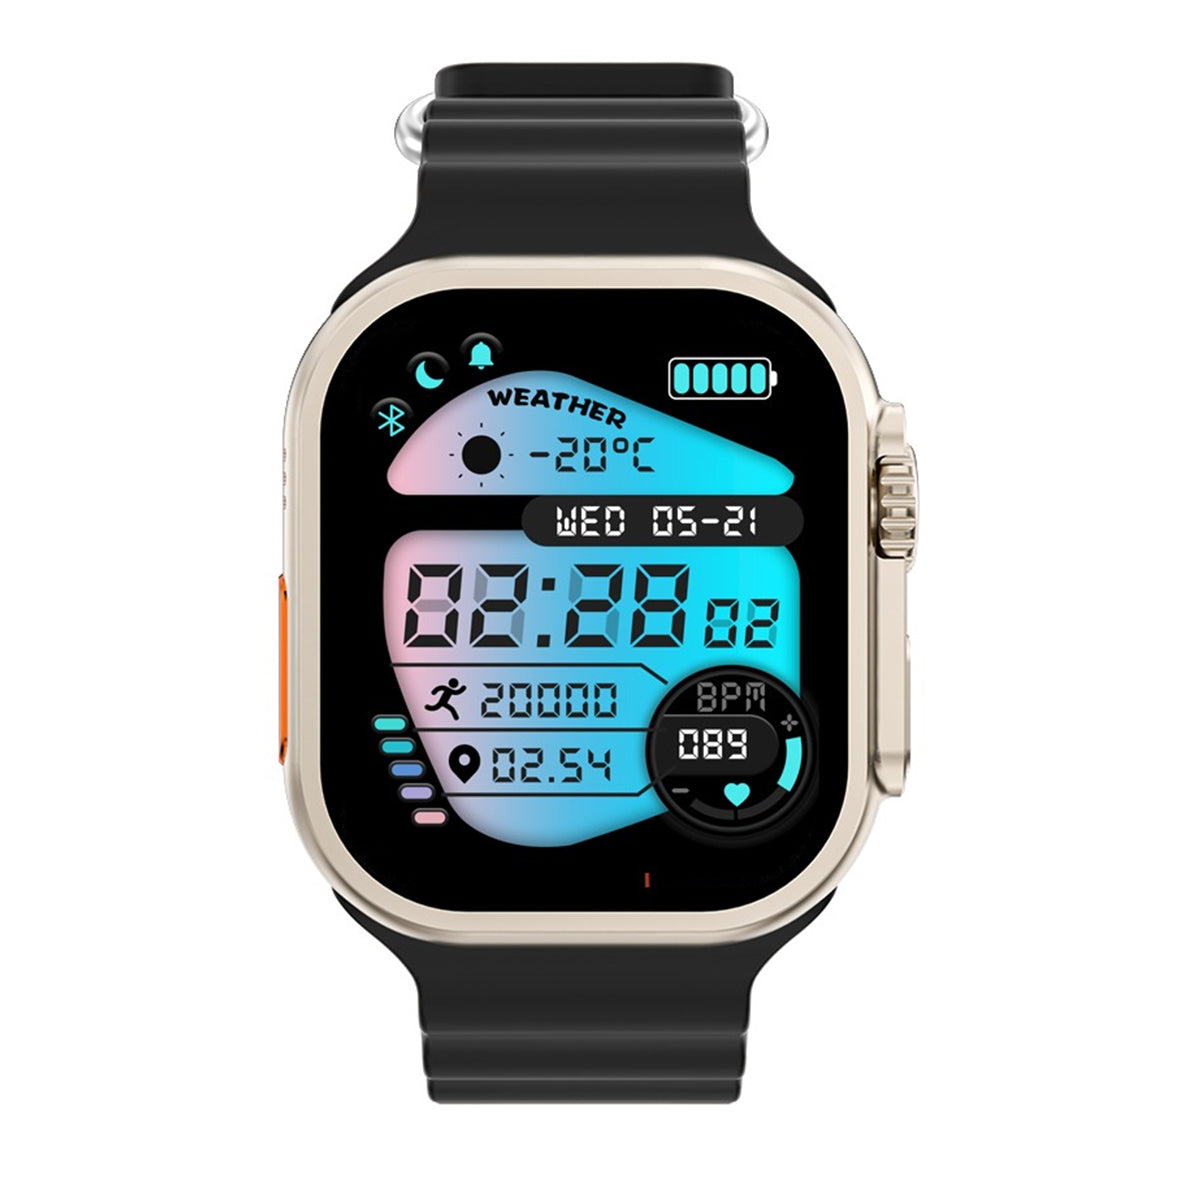 Smart Watch Reloj S800 Ultra Max Fralugio Nfc Full Touch Hd